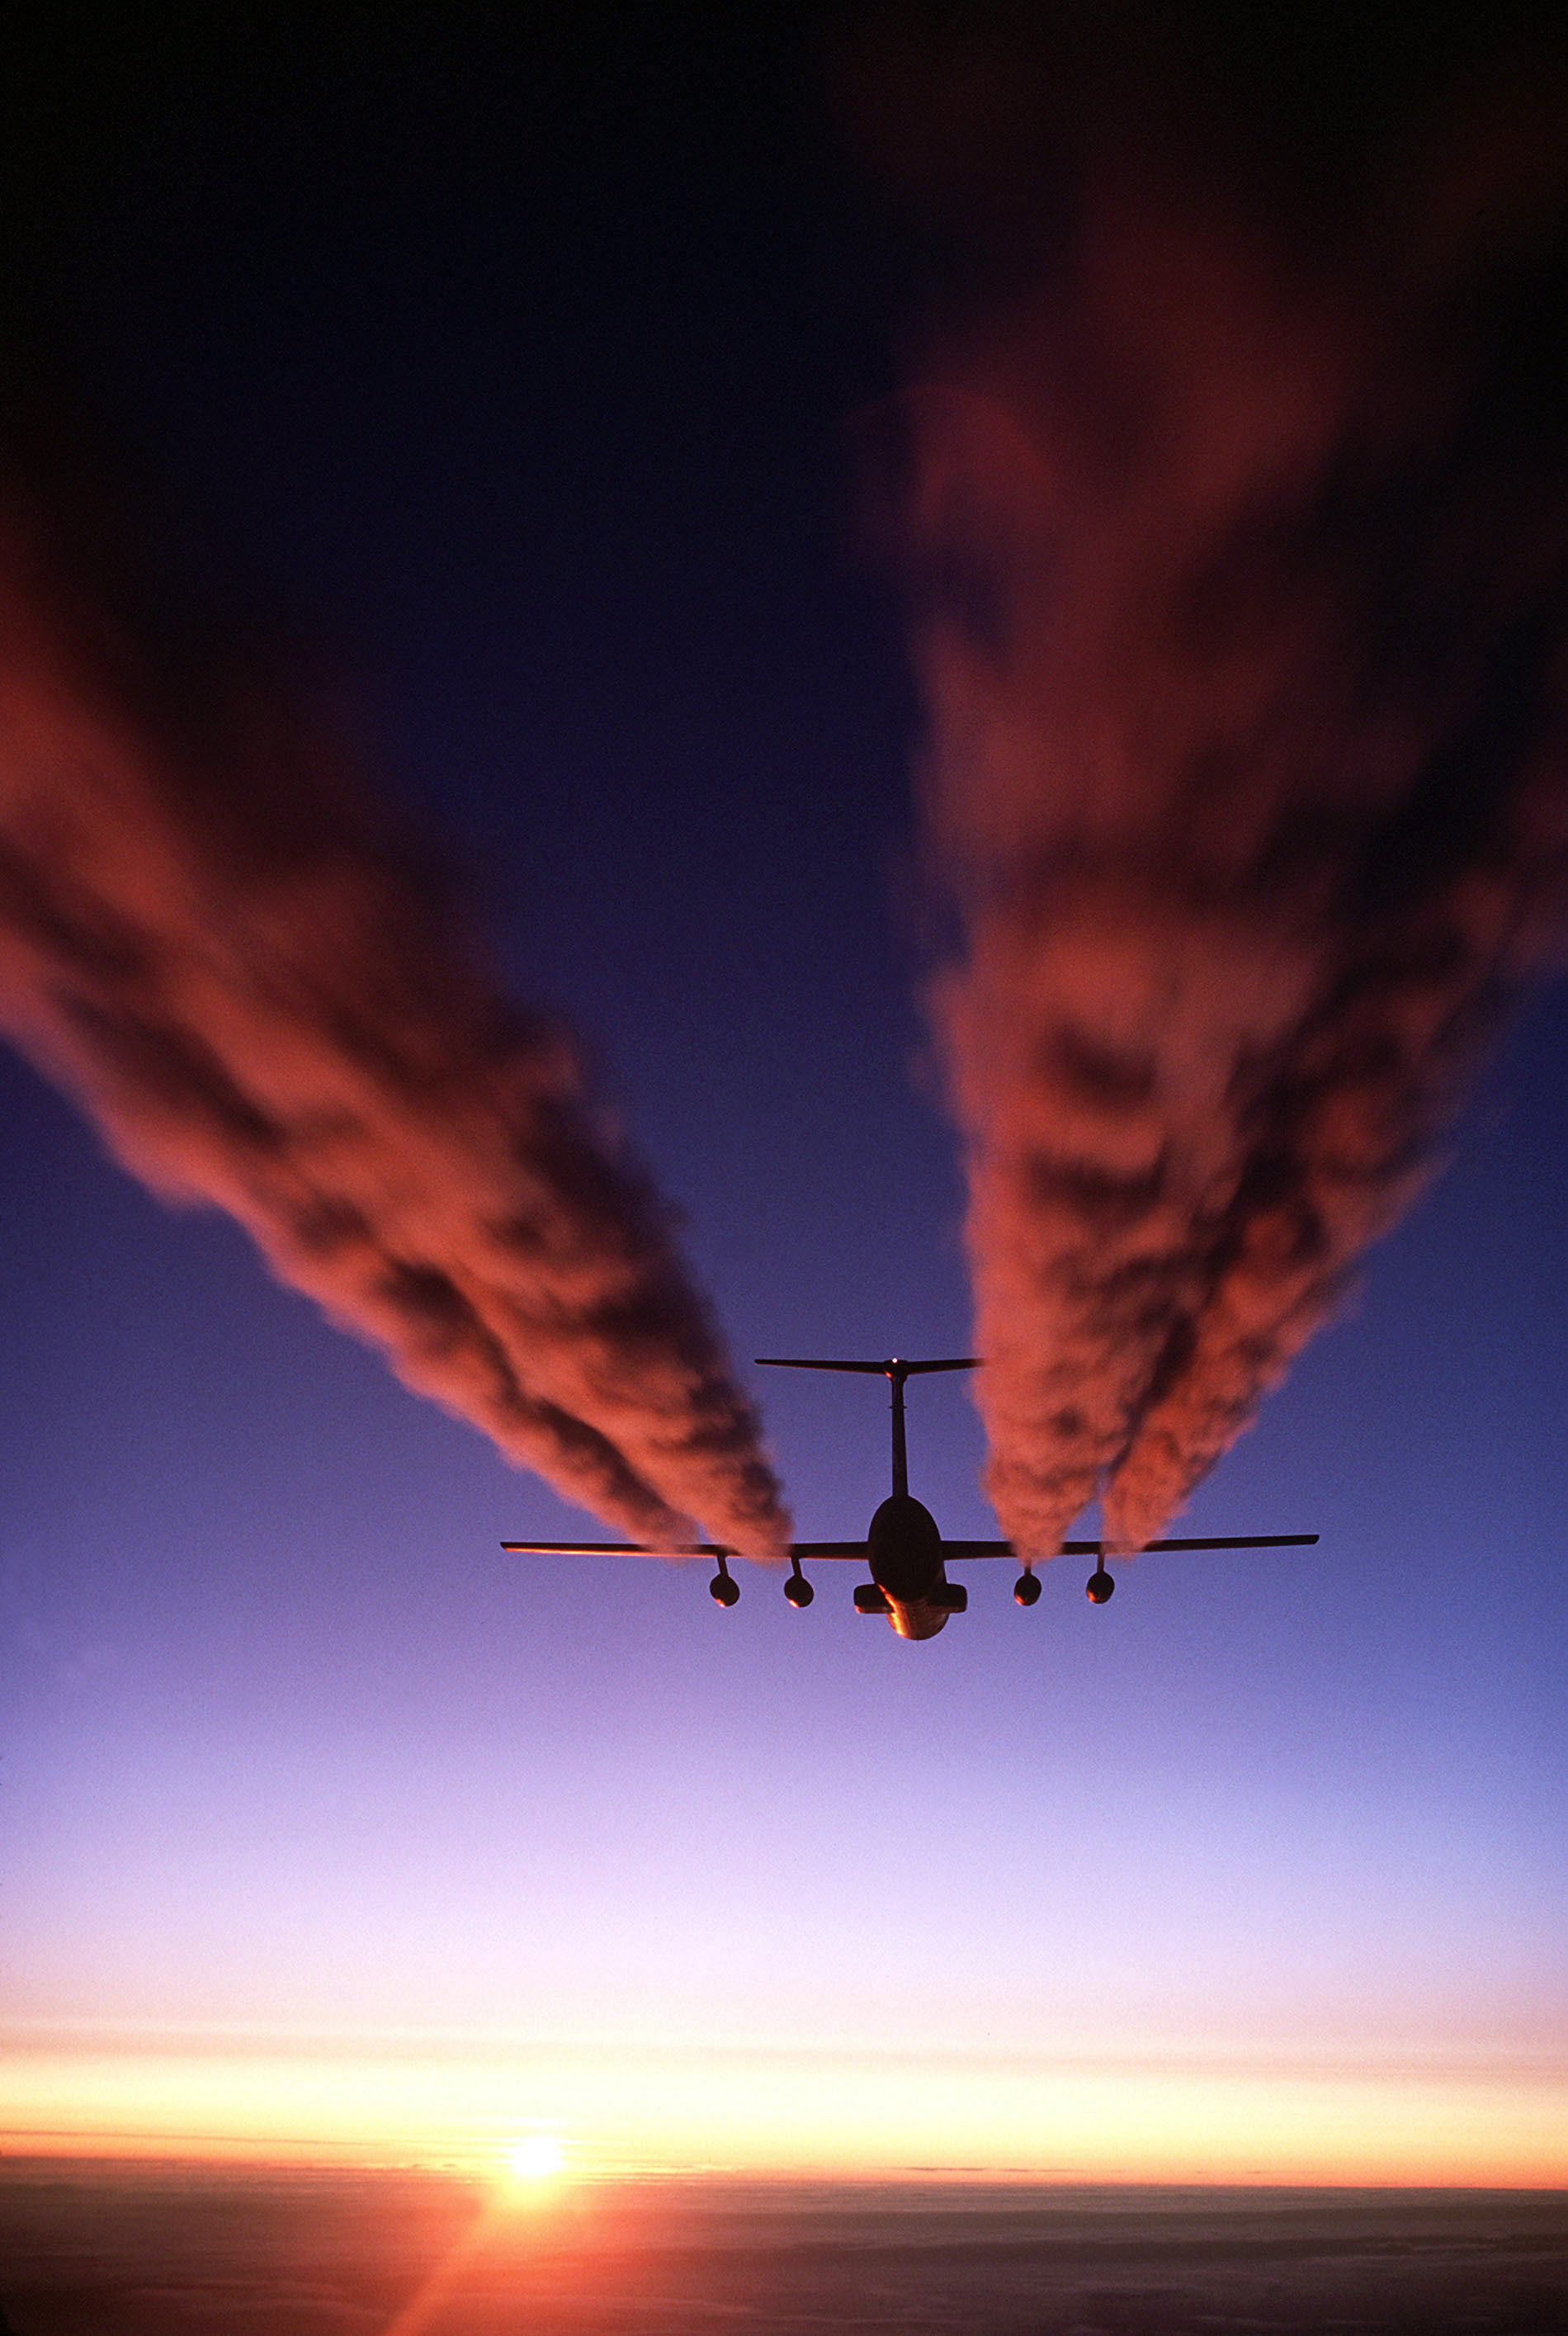 A C-141B Starlifter aircraft leaves four plumes of exhaust behind it as it prepares for an airdrop.